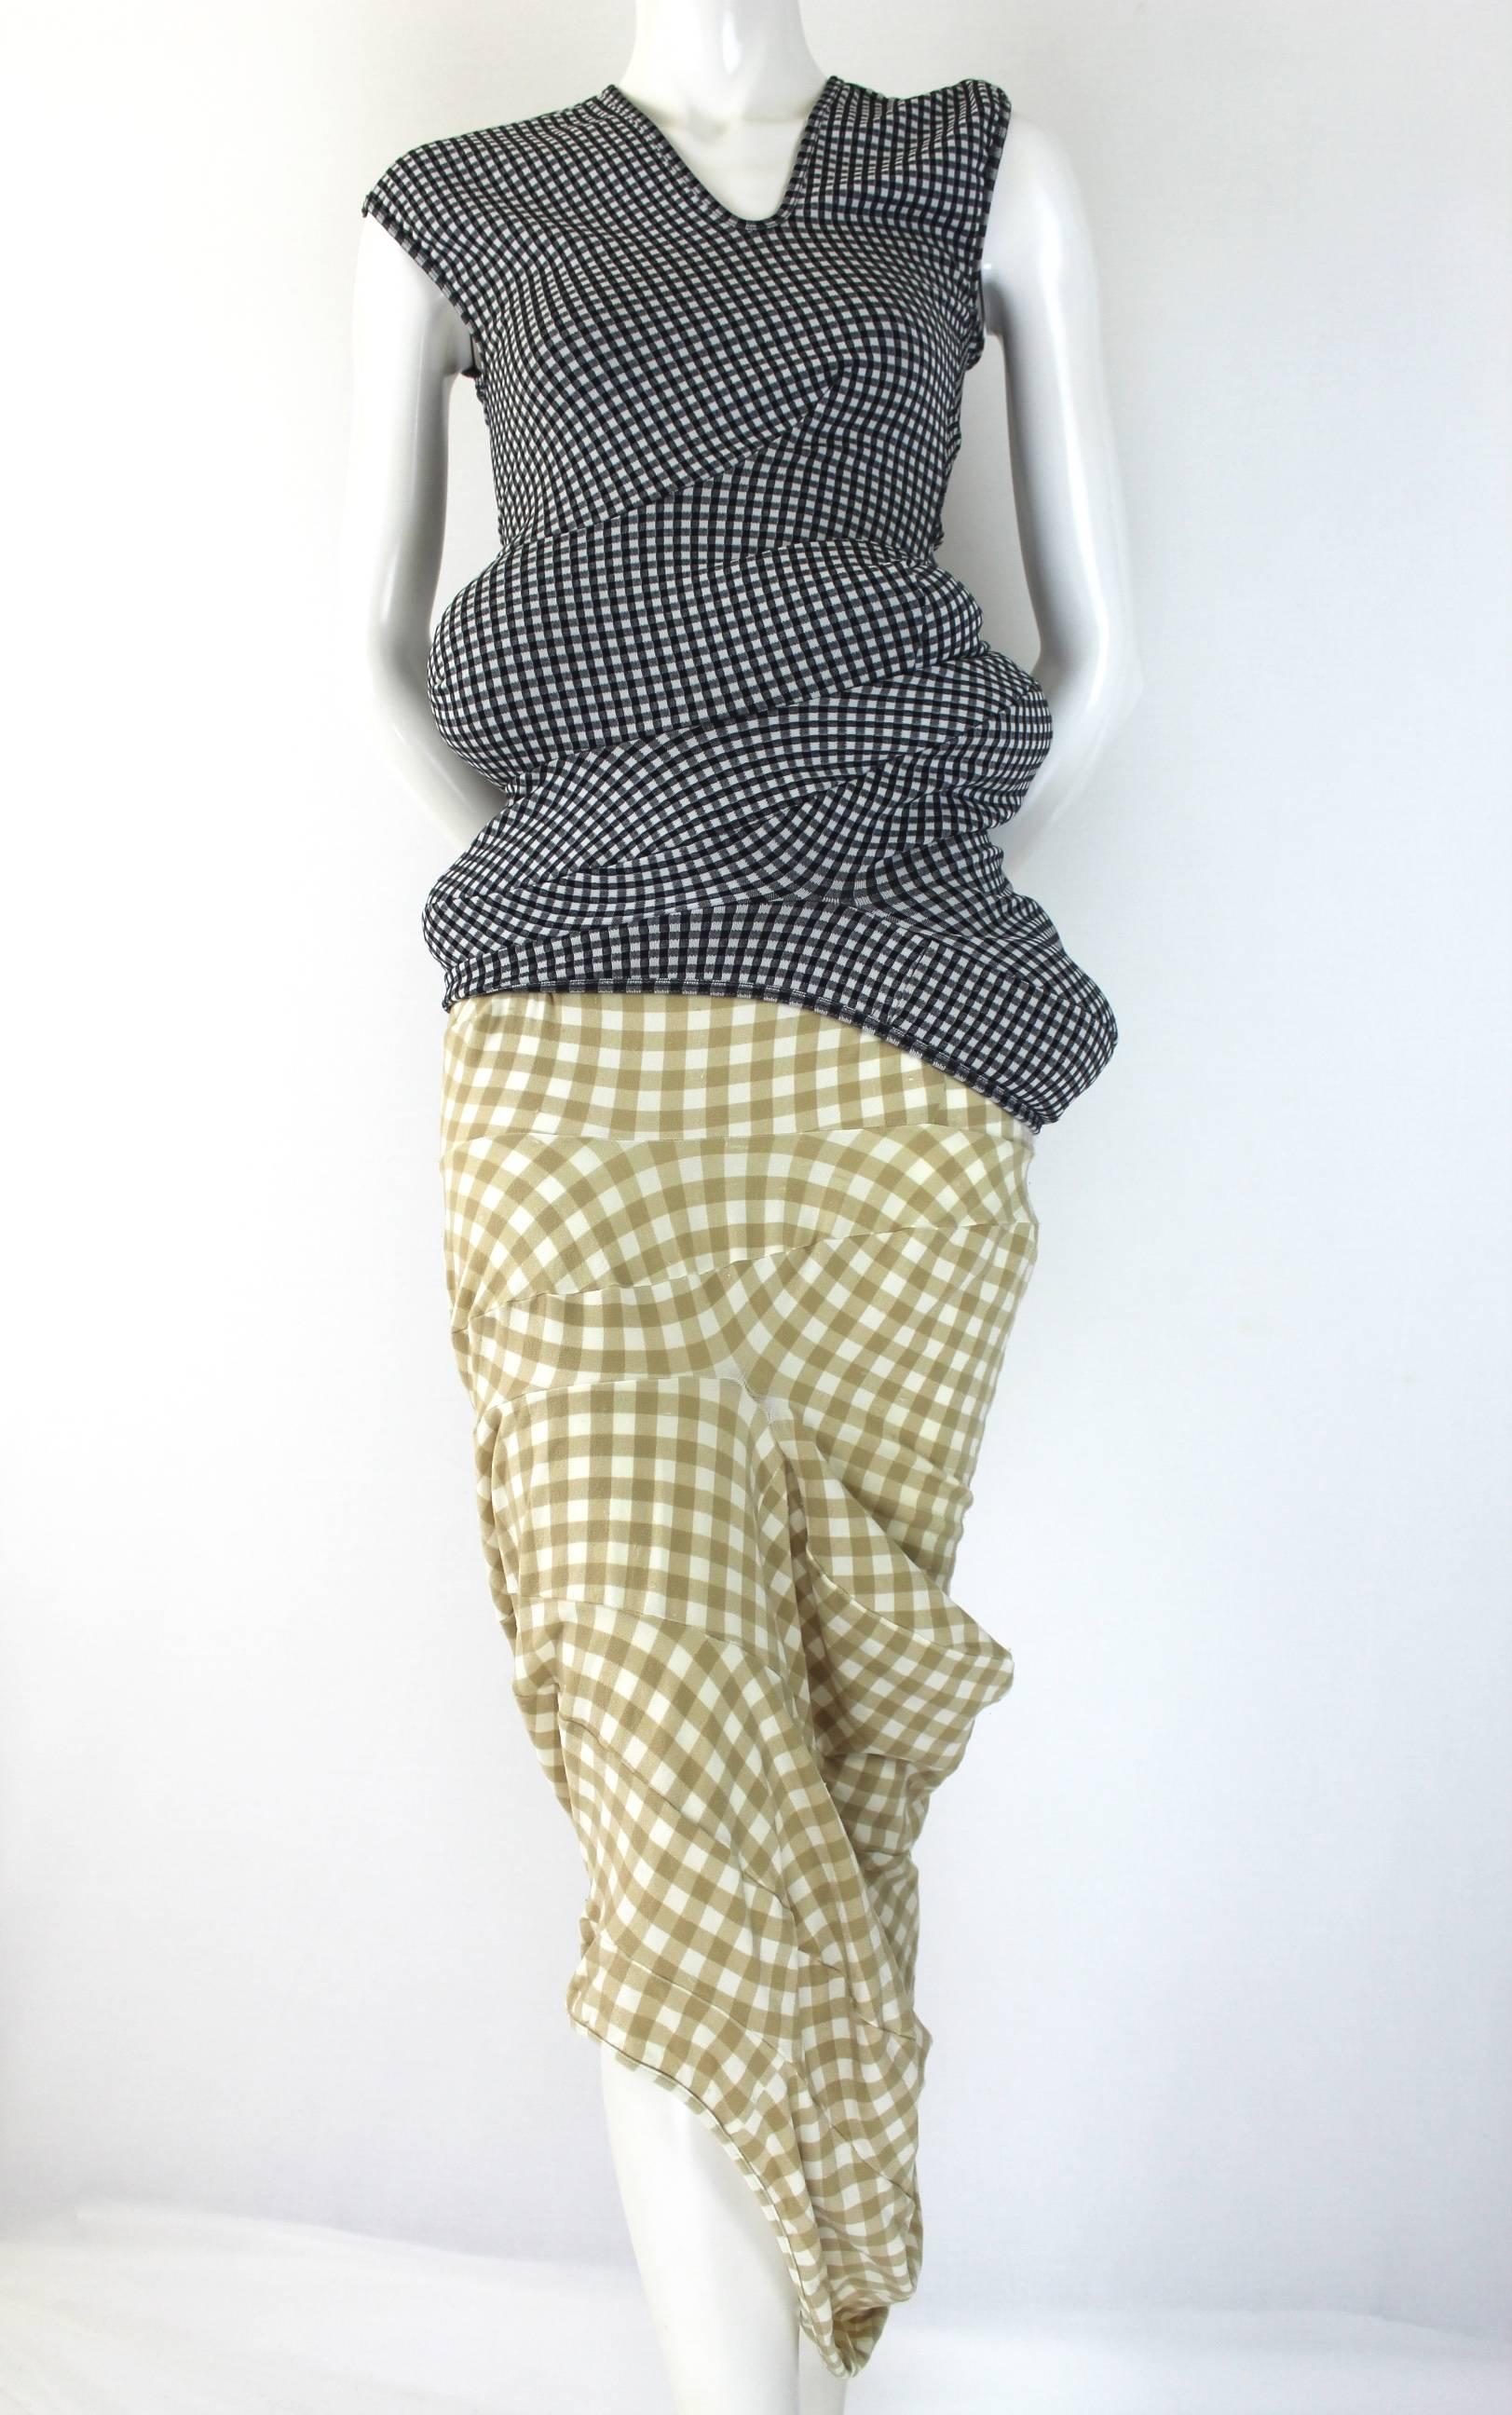 Comme des Garcons AD 1996 'Body Meets Dress' Gingham Skirt 3